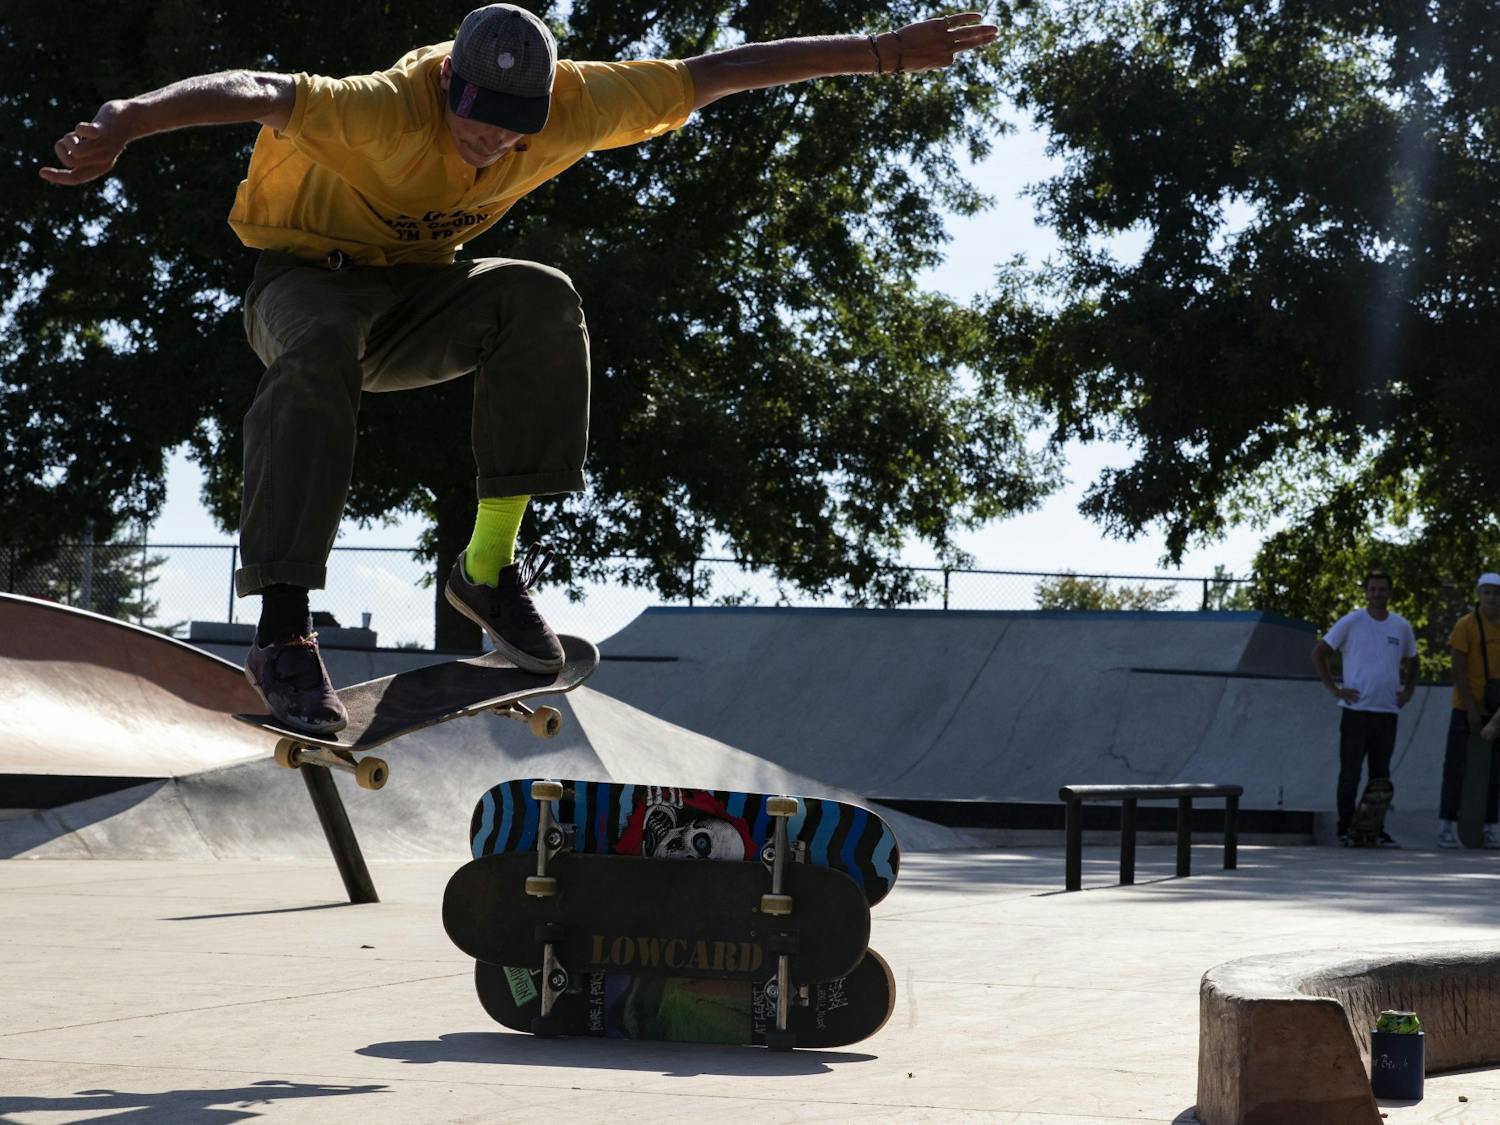 GALLERY: Skateboard Park Jam contest draws Southern Indiana skateboarders to Columbus